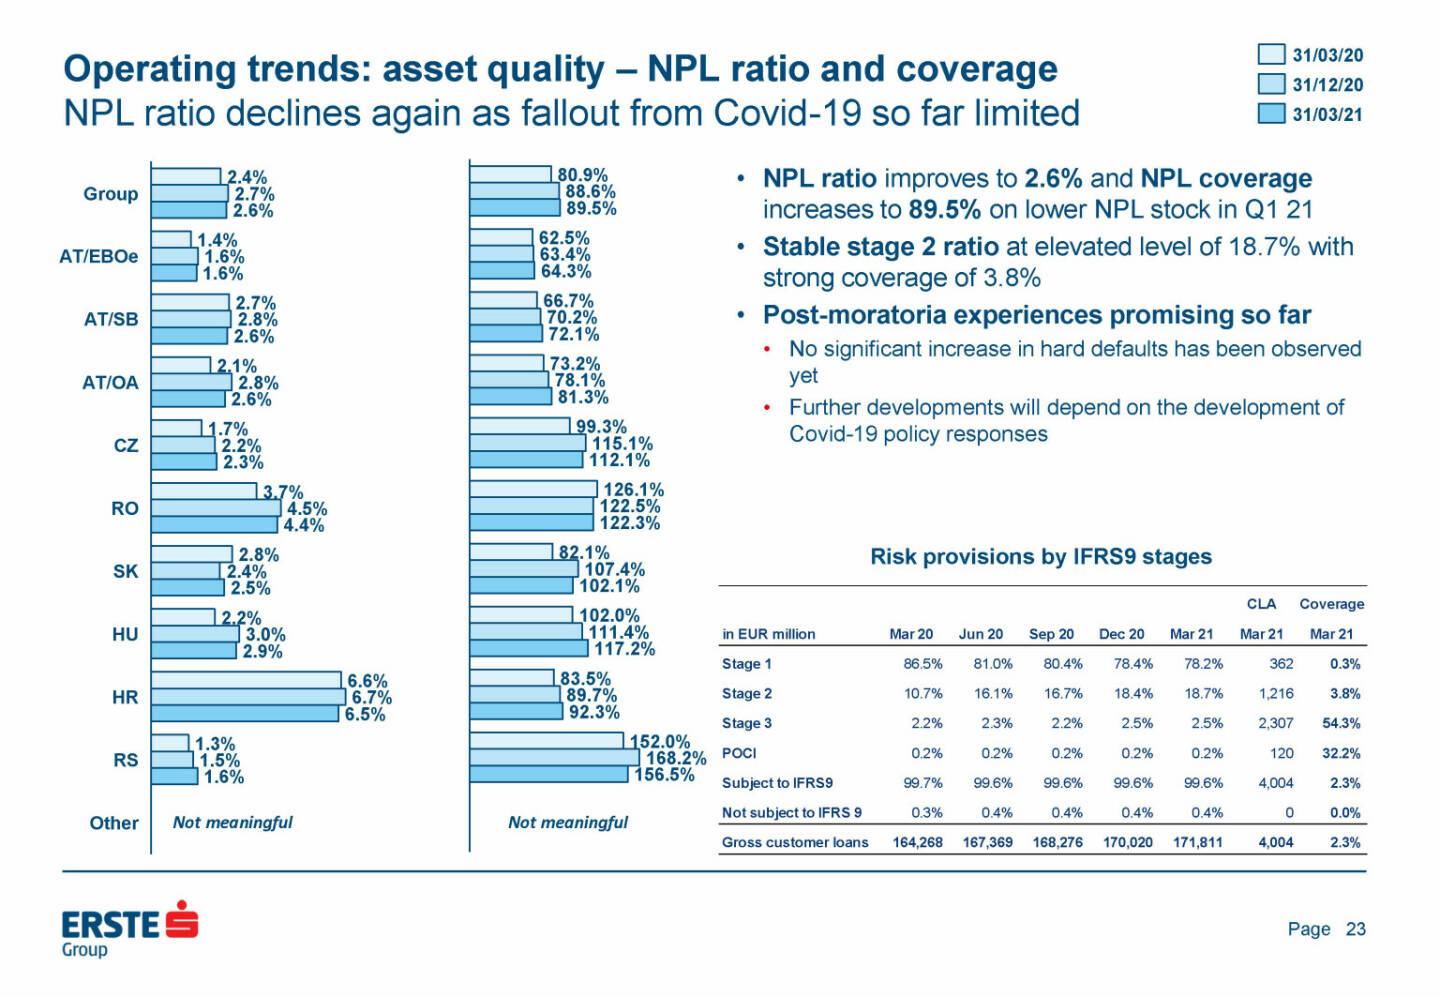 Erste Group - Operating trends: asset quality